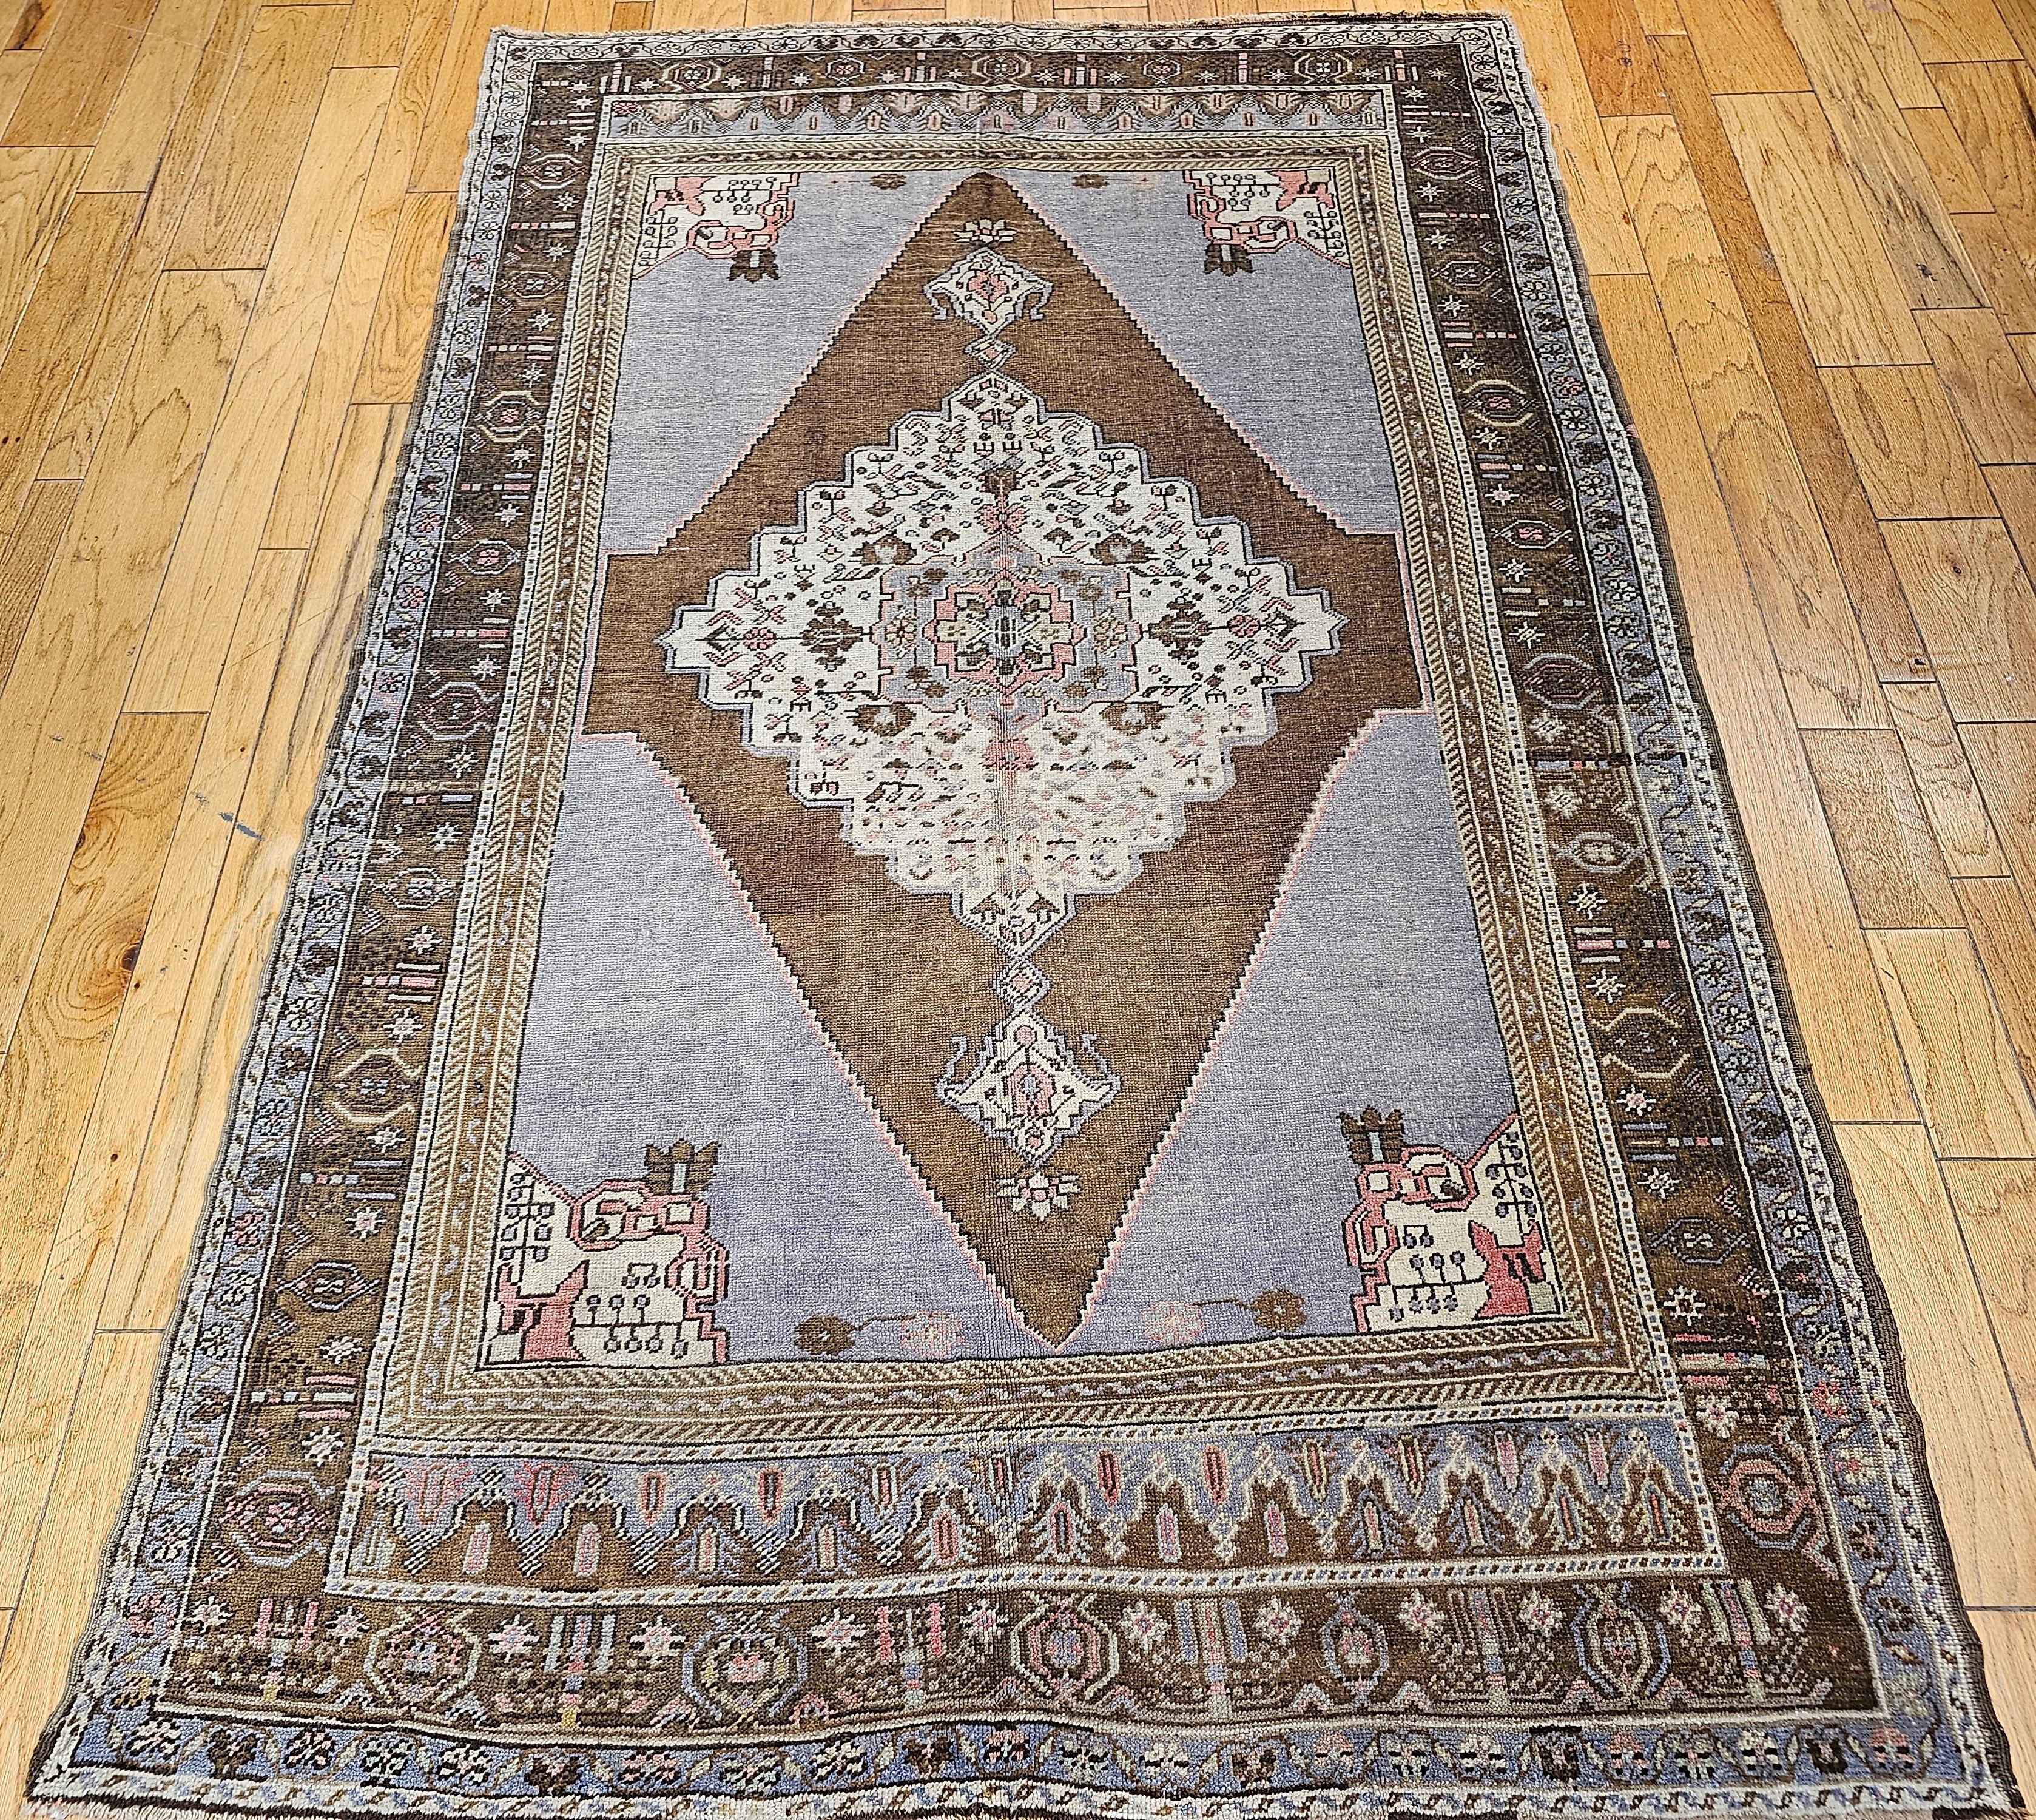 A beautiful vintage Turkish Oushak room size rug in a geometric medallion pattern in pale blue, brown, ivory, lavender, and pink colors from the early 20th century.  The rug has an open field design resembling Persian Bidjar and Serapi carpets.  